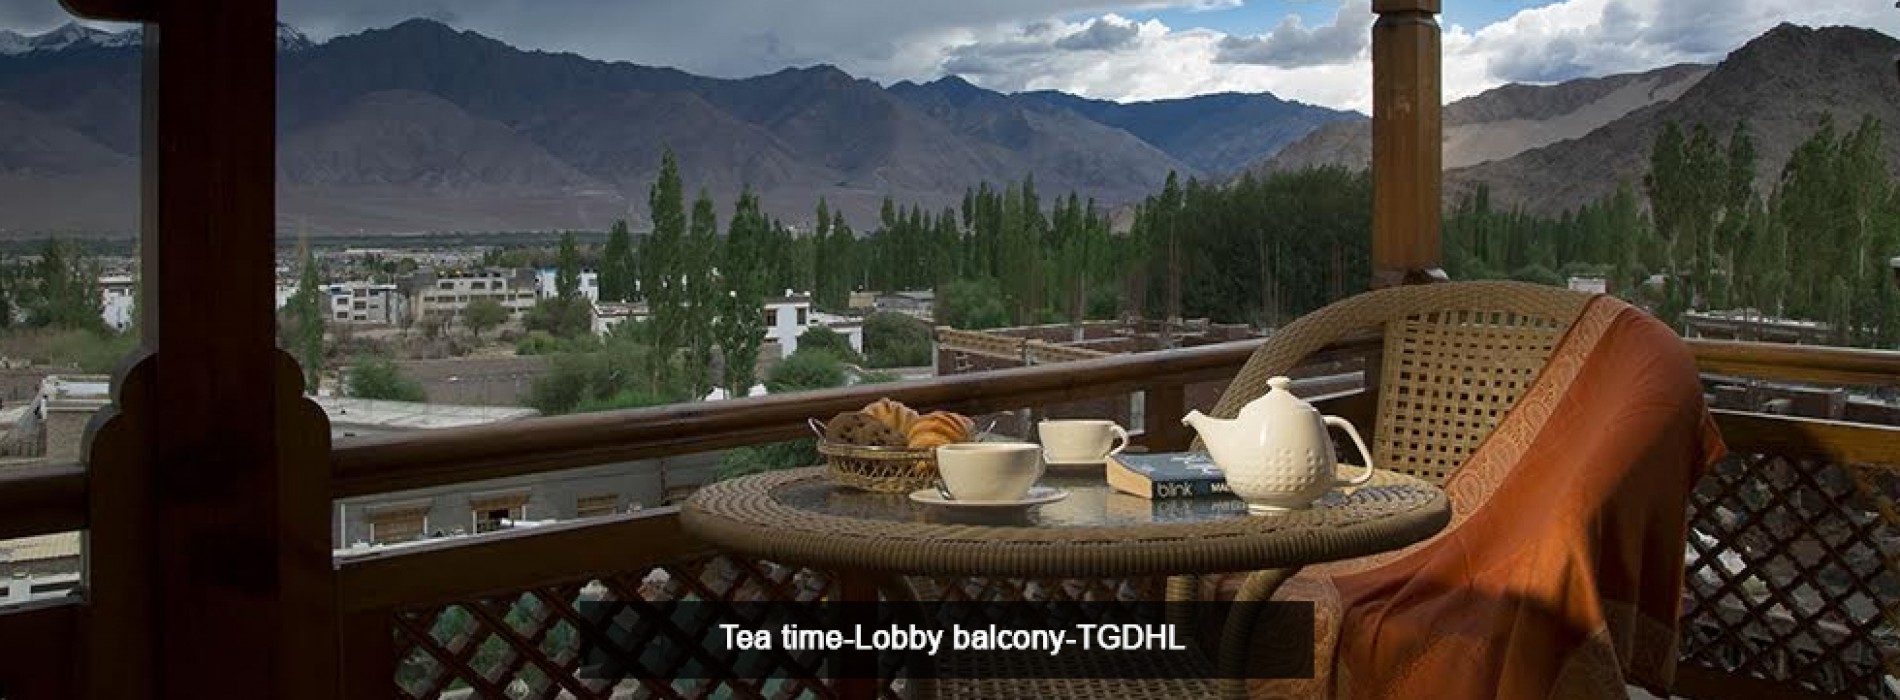 The Grand Dragon Hotel Ladakh – first international class hotel in remote and isolated outpost